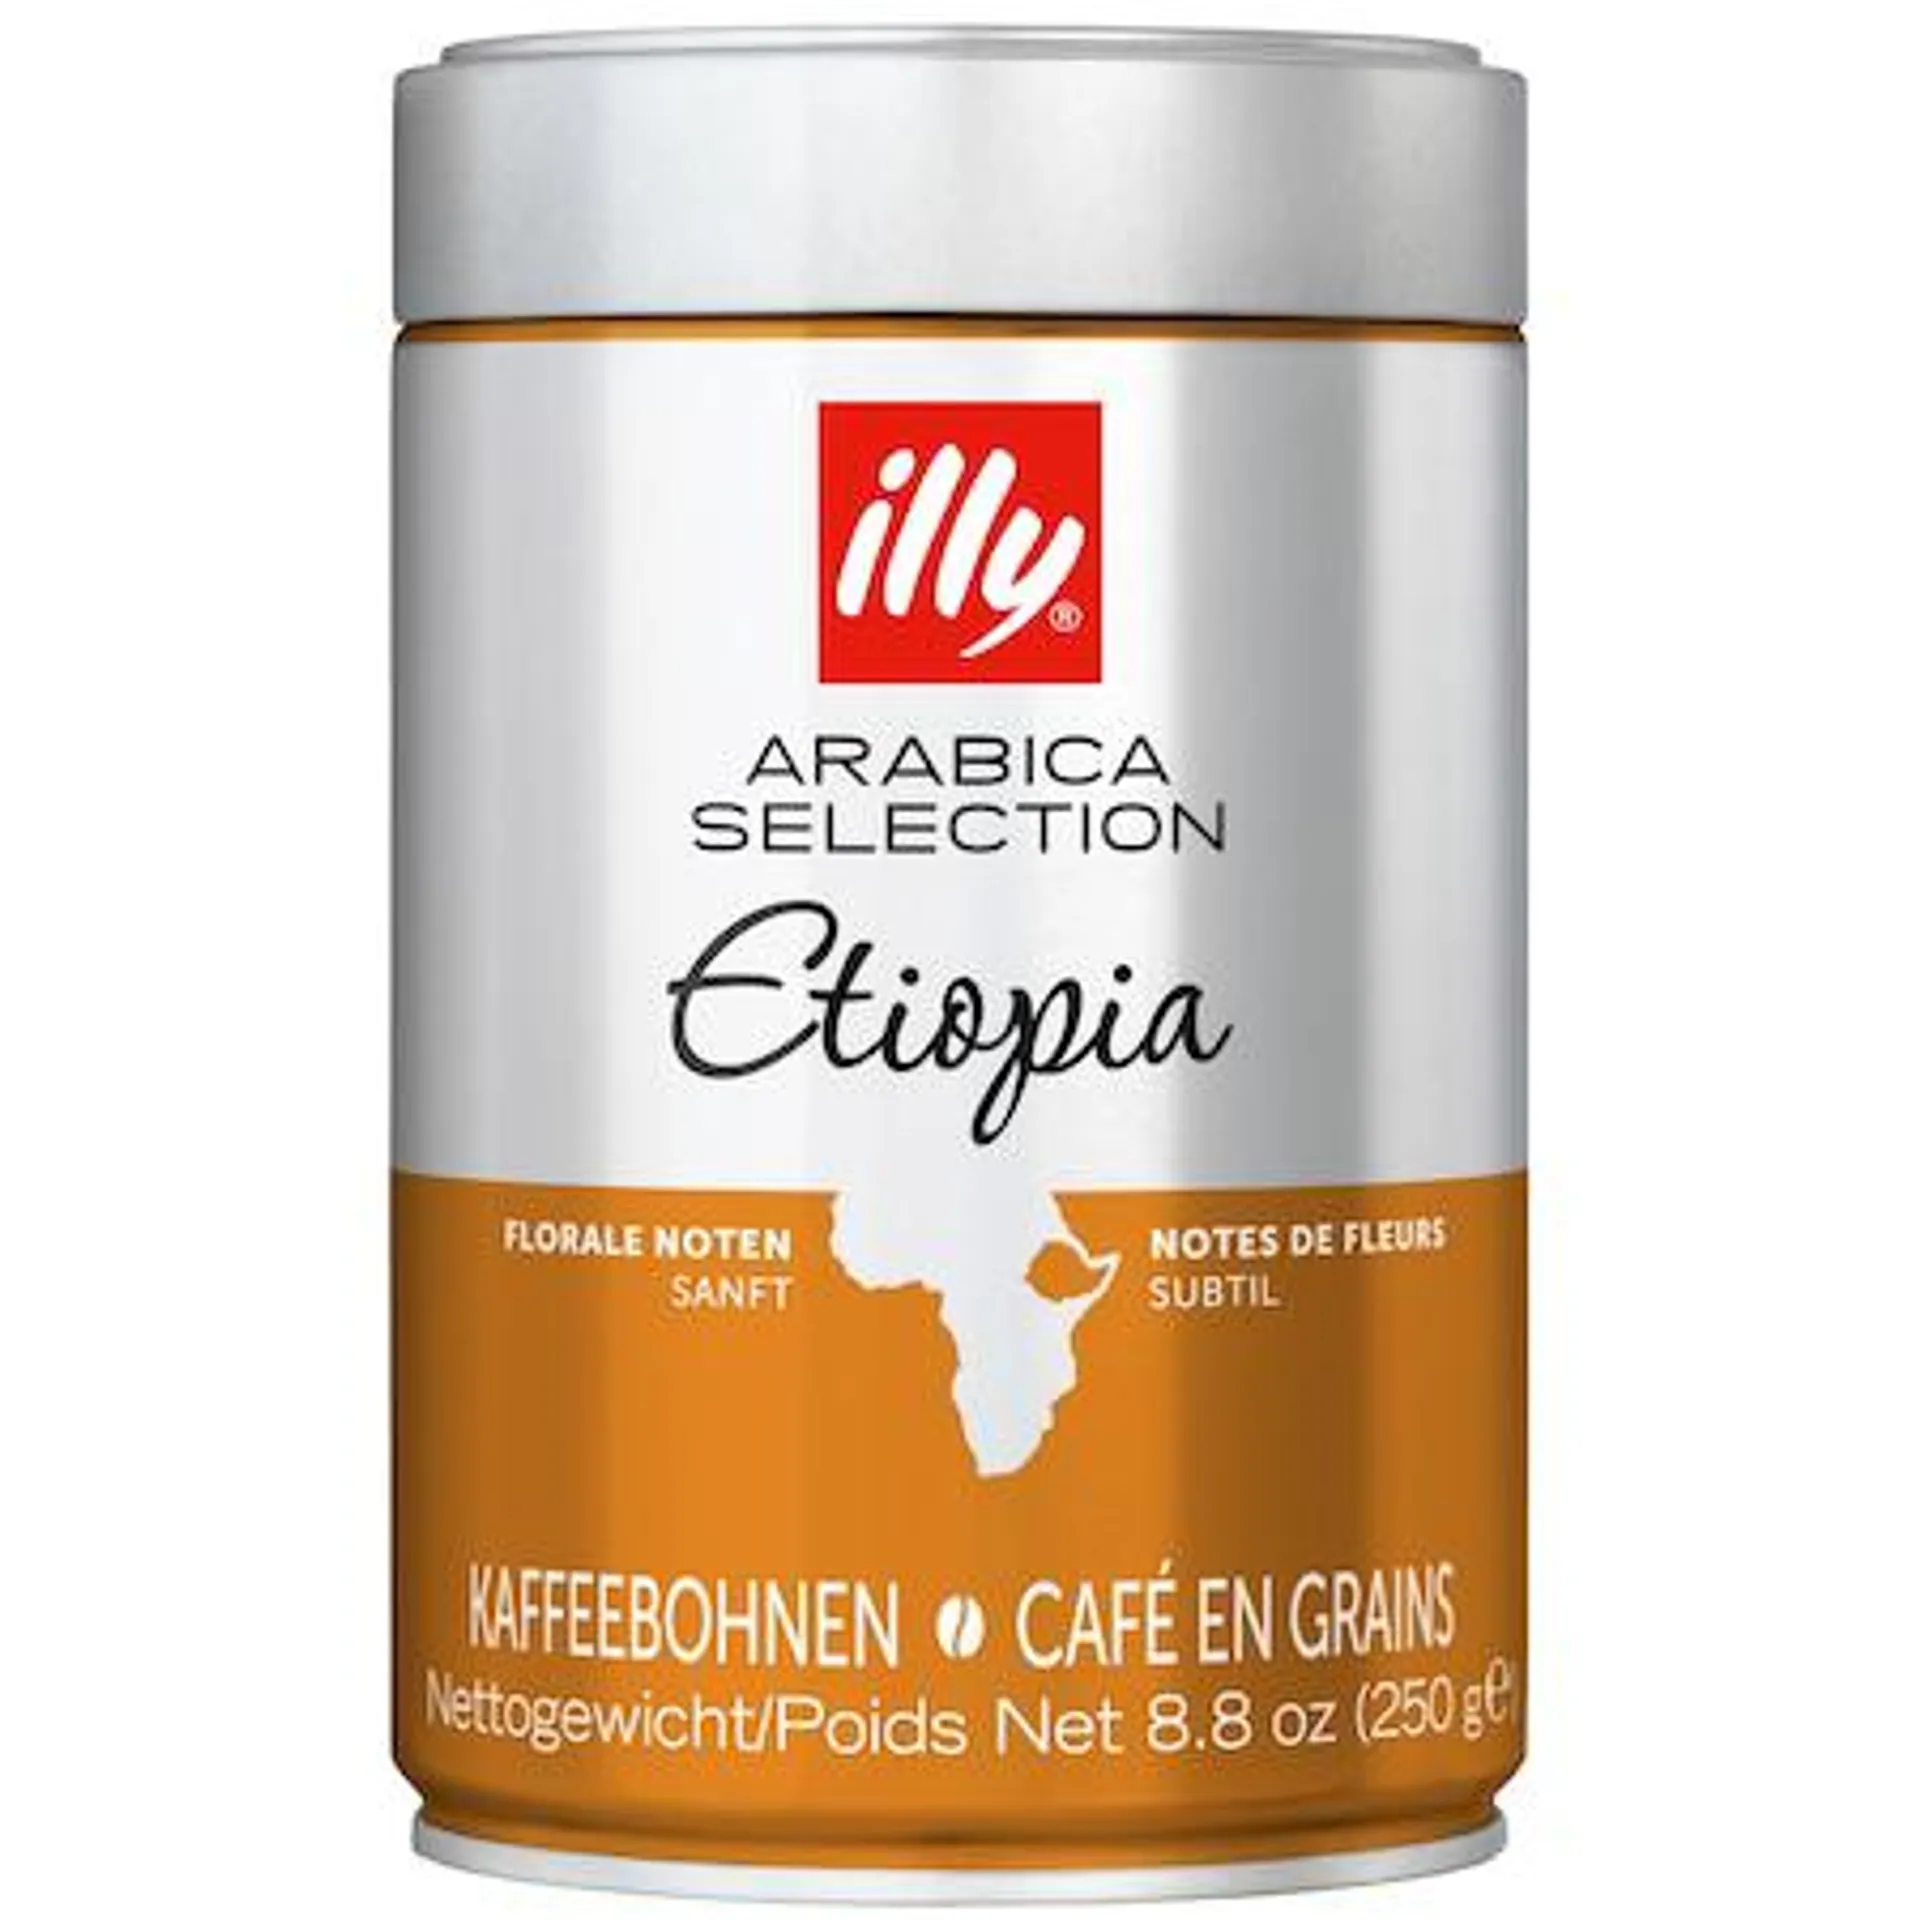 Cafea boabe illy Arabica Selection Etiopia, 250 gr.